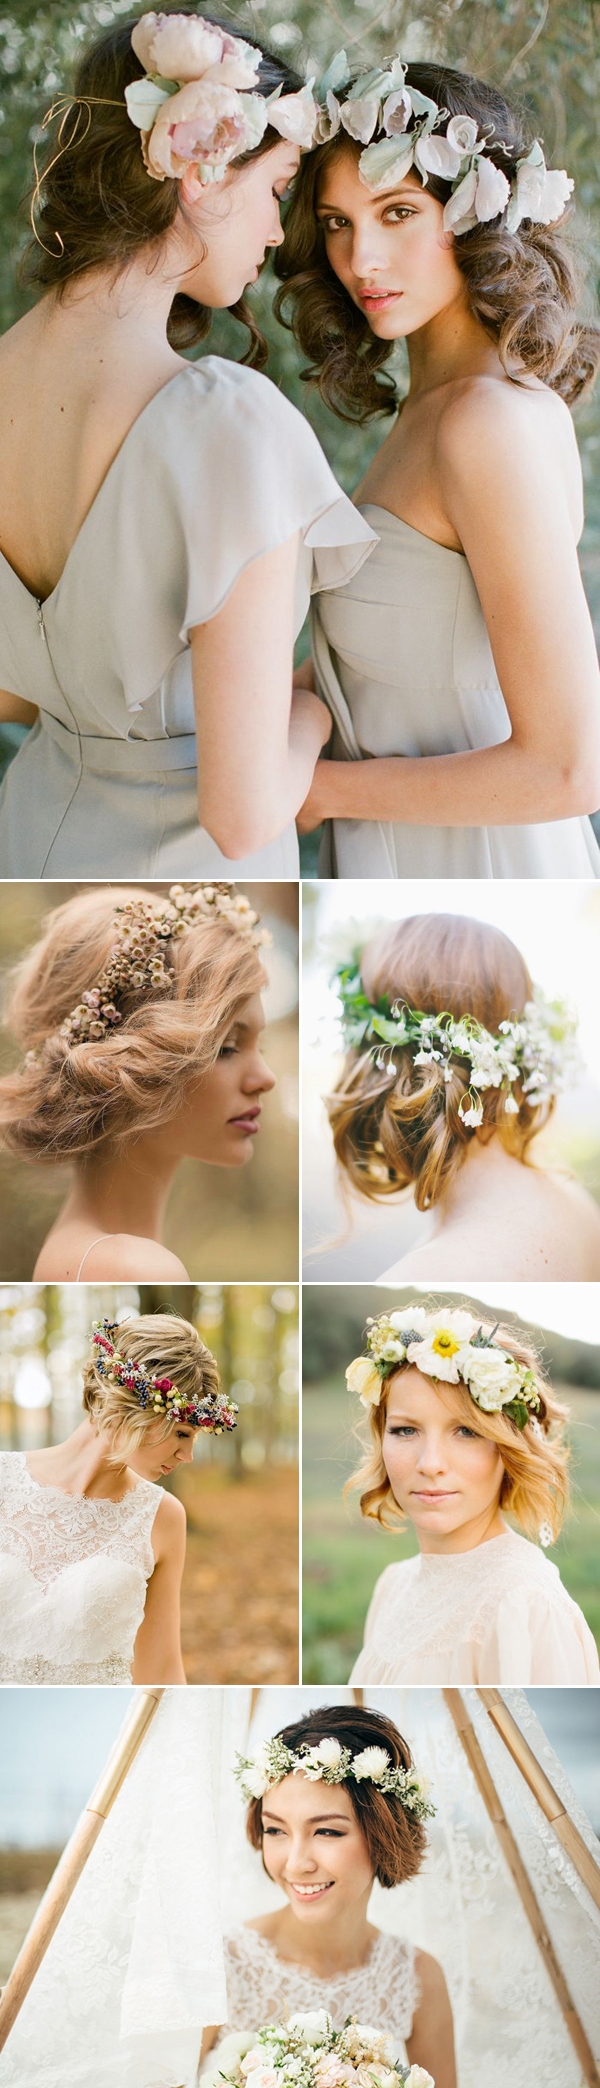 short wedding hairstyles with floral crown